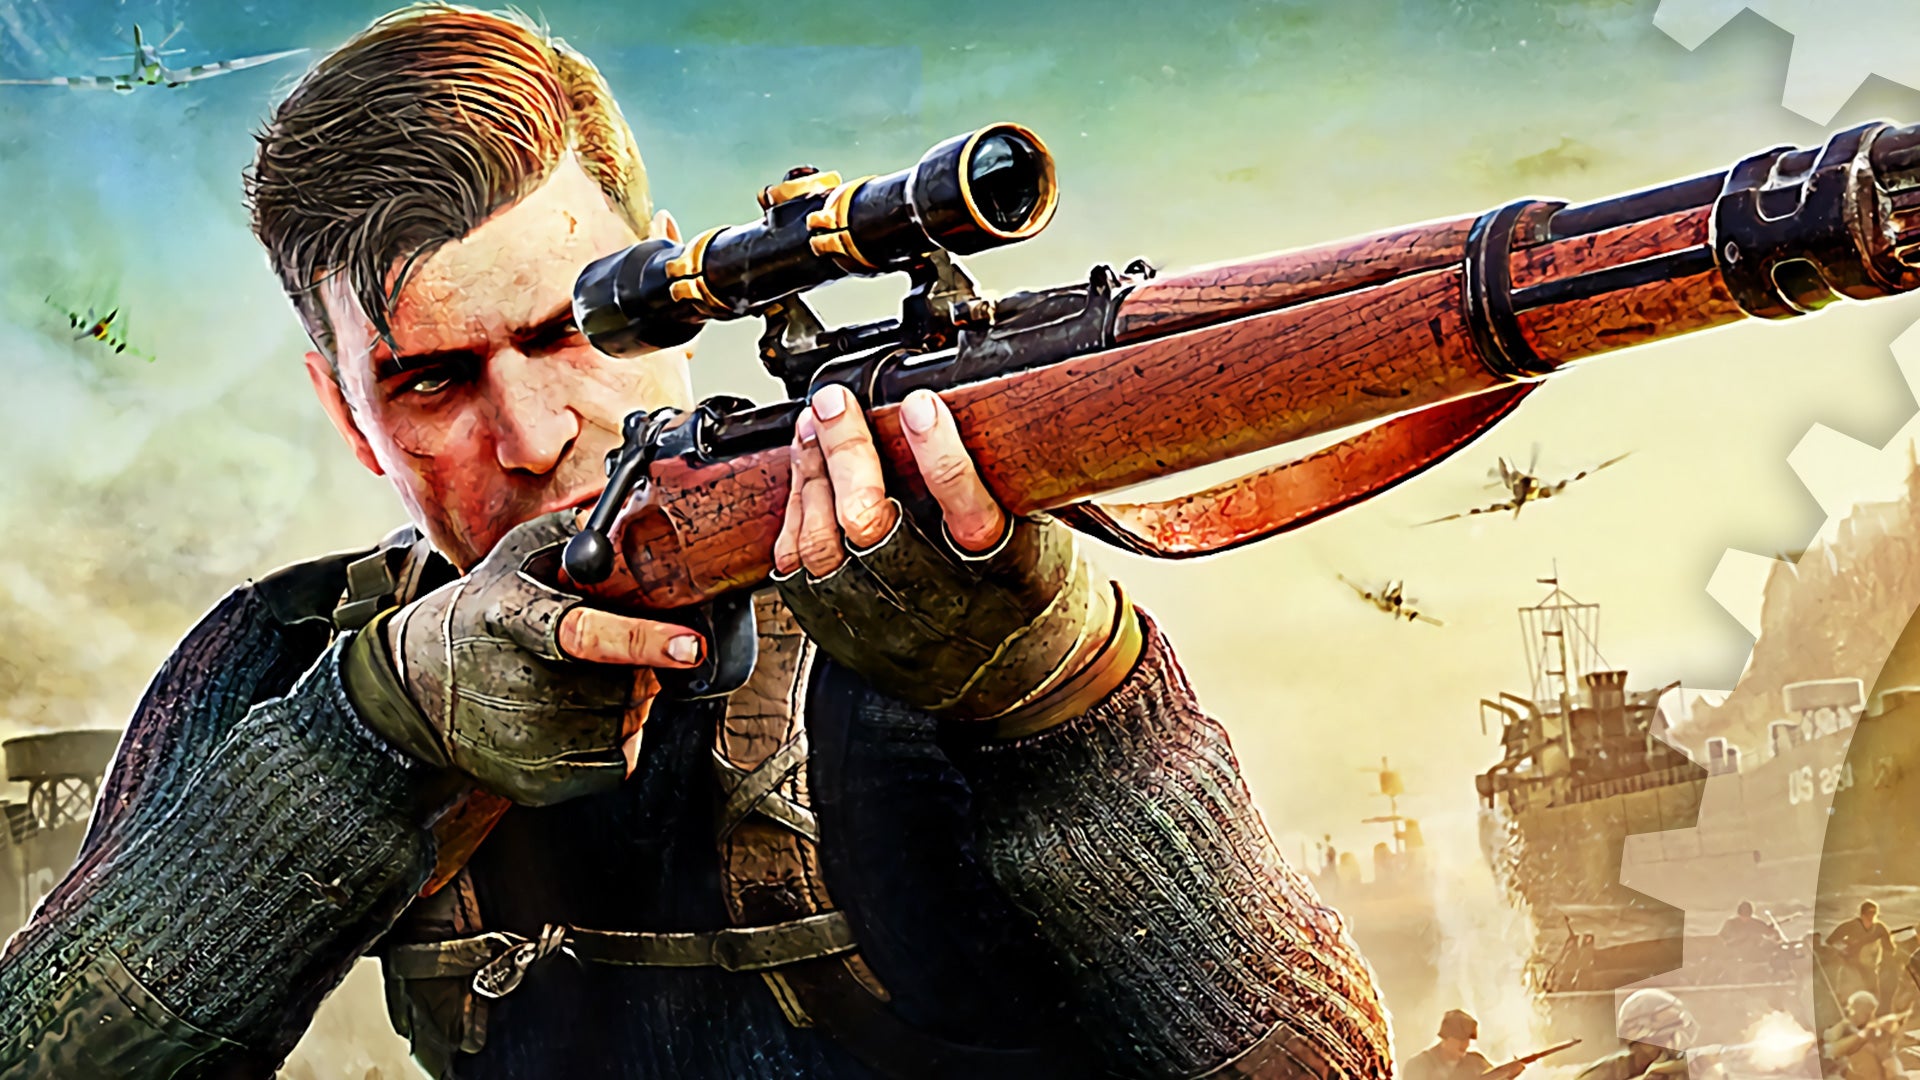 Image for Sniper Elite 5 tech analysis: Rebellion's in-house Asura engine continues to impress